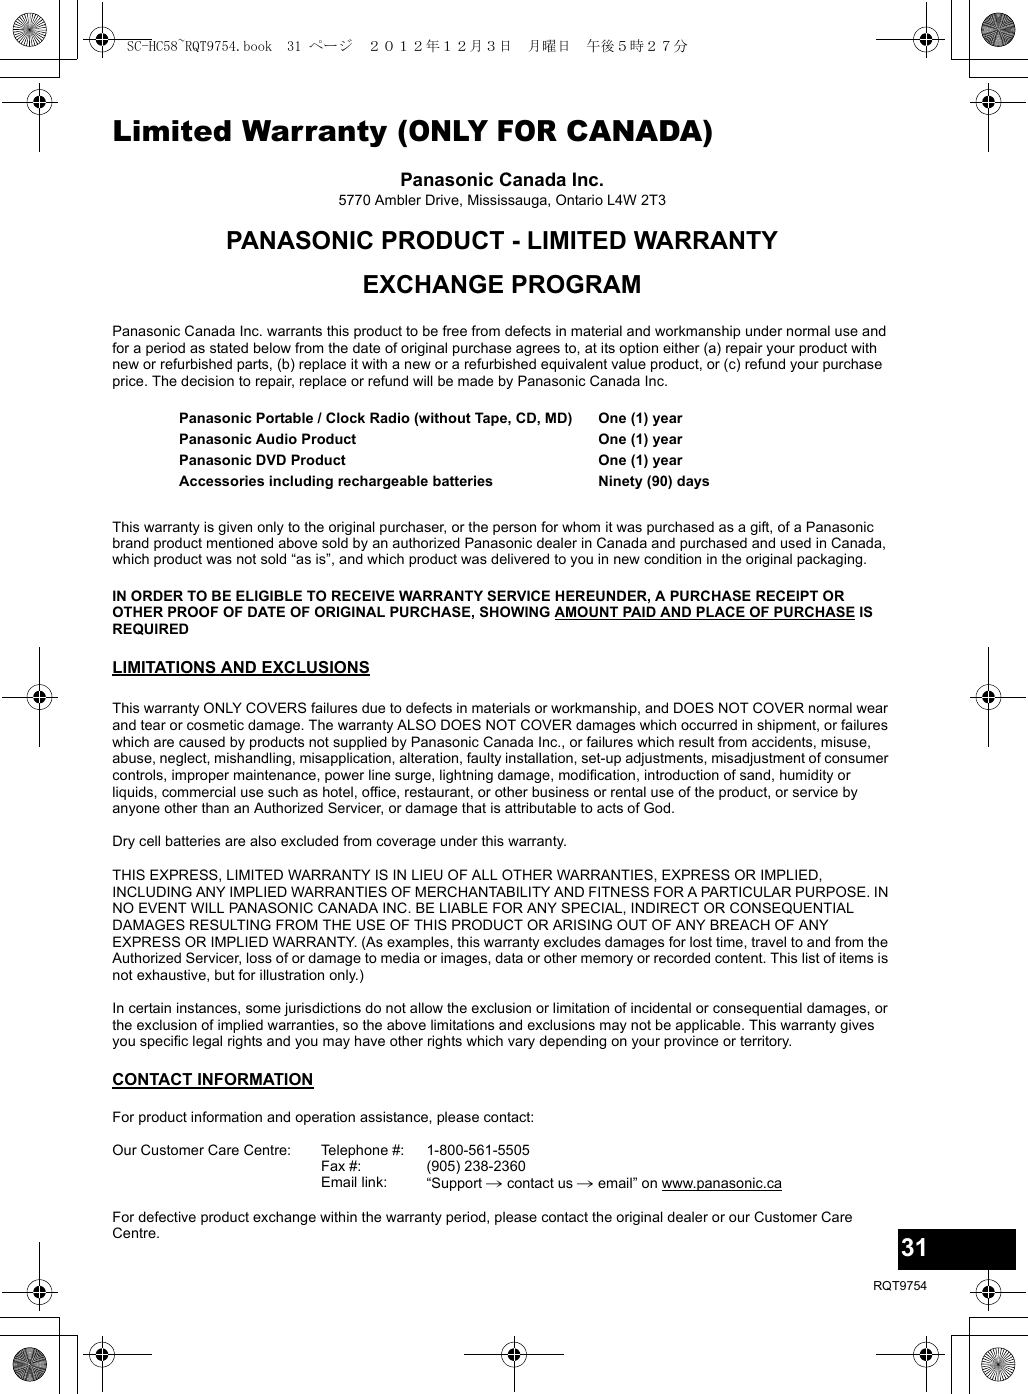 31RQT9754Limited Warranty (ONLY FOR CANADA)Panasonic Canada Inc.5770 Ambler Drive, Mississauga, Ontario L4W 2T3PANASONIC PRODUCT - LIMITED WARRANTYEXCHANGE PROGRAMPanasonic Canada Inc. warrants this product to be free from defects in material and workmanship under normal use and for a period as stated below from the date of original purchase agrees to, at its option either (a) repair your product with new or refurbished parts, (b) replace it with a new or a refurbished equivalent value product, or (c) refund your purchase price. The decision to repair, replace or refund will be made by Panasonic Canada Inc.This warranty is given only to the original purchaser, or the person for whom it was purchased as a gift, of a Panasonic brand product mentioned above sold by an authorized Panasonic dealer in Canada and purchased and used in Canada, which product was not sold “as is”, and which product was delivered to you in new condition in the original packaging.IN ORDER TO BE ELIGIBLE TO RECEIVE WARRANTY SERVICE HEREUNDER, A PURCHASE RECEIPT OR OTHER PROOF OF DATE OF ORIGINAL PURCHASE, SHOWING AMOUNT PAID AND PLACE OF PURCHASE IS REQUIRED LIMITATIONS AND EXCLUSIONSThis warranty ONLY COVERS failures due to defects in materials or workmanship, and DOES NOT COVER normal wear and tear or cosmetic damage. The warranty ALSO DOES NOT COVER damages which occurred in shipment, or failures which are caused by products not supplied by Panasonic Canada Inc., or failures which result from accidents, misuse, abuse, neglect, mishandling, misapplication, alteration, faulty installation, set-up adjustments, misadjustment of consumer controls, improper maintenance, power line surge, lightning damage, modification, introduction of sand, humidity or liquids, commercial use such as hotel, office, restaurant, or other business or rental use of the product, or service by anyone other than an Authorized Servicer, or damage that is attributable to acts of God.Dry cell batteries are also excluded from coverage under this warranty.THIS EXPRESS, LIMITED WARRANTY IS IN LIEU OF ALL OTHER WARRANTIES, EXPRESS OR IMPLIED, INCLUDING ANY IMPLIED WARRANTIES OF MERCHANTABILITY AND FITNESS FOR A PARTICULAR PURPOSE. IN NO EVENT WILL PANASONIC CANADA INC. BE LIABLE FOR ANY SPECIAL, INDIRECT OR CONSEQUENTIAL DAMAGES RESULTING FROM THE USE OF THIS PRODUCT OR ARISING OUT OF ANY BREACH OF ANY EXPRESS OR IMPLIED WARRANTY. (As examples, this warranty excludes damages for lost time, travel to and from the Authorized Servicer, loss of or damage to media or images, data or other memory or recorded content. This list of items is not exhaustive, but for illustration only.)In certain instances, some jurisdictions do not allow the exclusion or limitation of incidental or consequential damages, or the exclusion of implied warranties, so the above limitations and exclusions may not be applicable. This warranty gives you specific legal rights and you may have other rights which vary depending on your province or territory.CONTACT INFORMATIONPanasonic Portable / Clock Radio (without Tape, CD, MD)Panasonic Audio ProductPanasonic DVD ProductAccessories including rechargeable batteriesOne (1) yearOne (1) yearOne (1) yearNinety (90) daysFor product information and operation assistance, please contact:Our Customer Care Centre: Telephone #:Fax #:Email link:1-800-561-5505(905) 238-2360“Support # contact us # email” on www.panasonic.caFor defective product exchange within the warranty period, please contact the original dealer or our Customer Care Centre.SC-HC58~RQT9754.book  31 ページ  ２０１２年１２月３日　月曜日　午後５時２７分